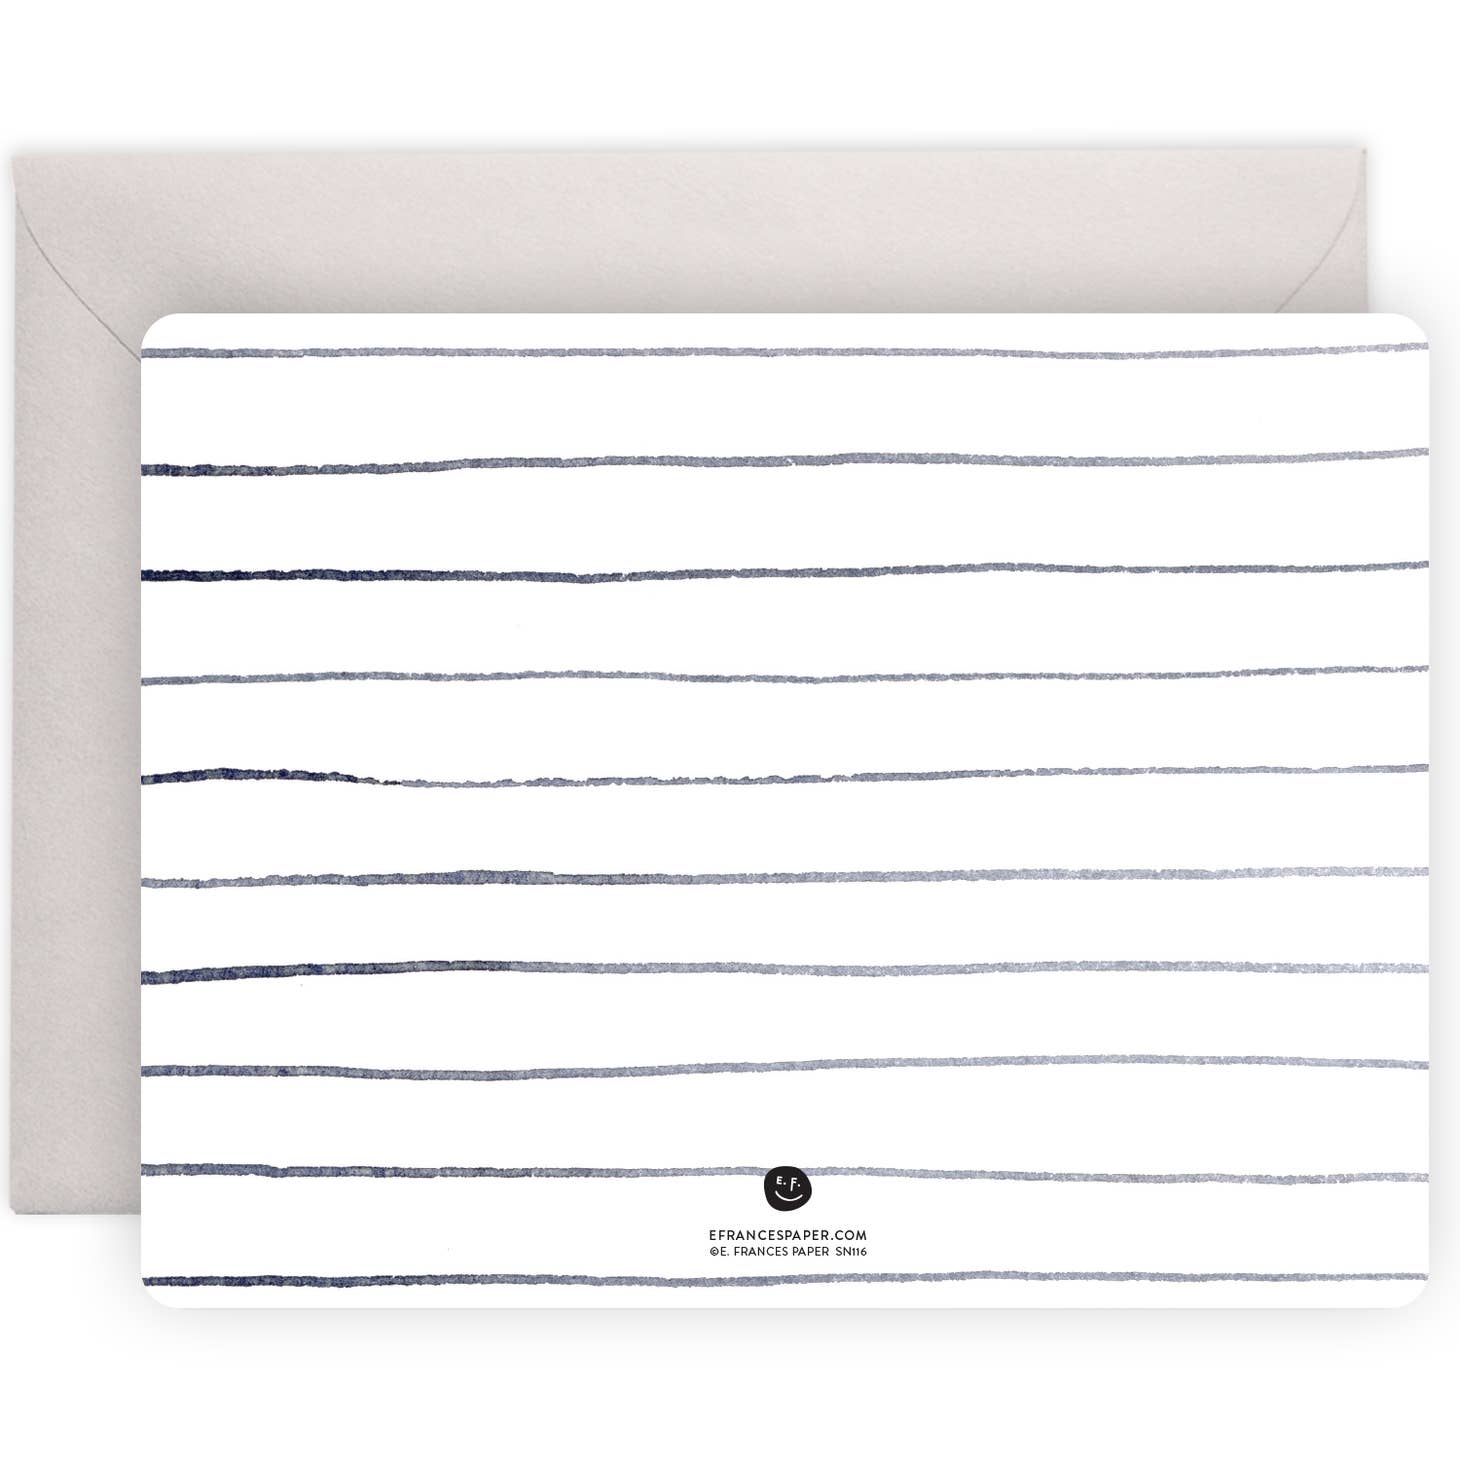 White background with grey lines. Grey envelope is included.  